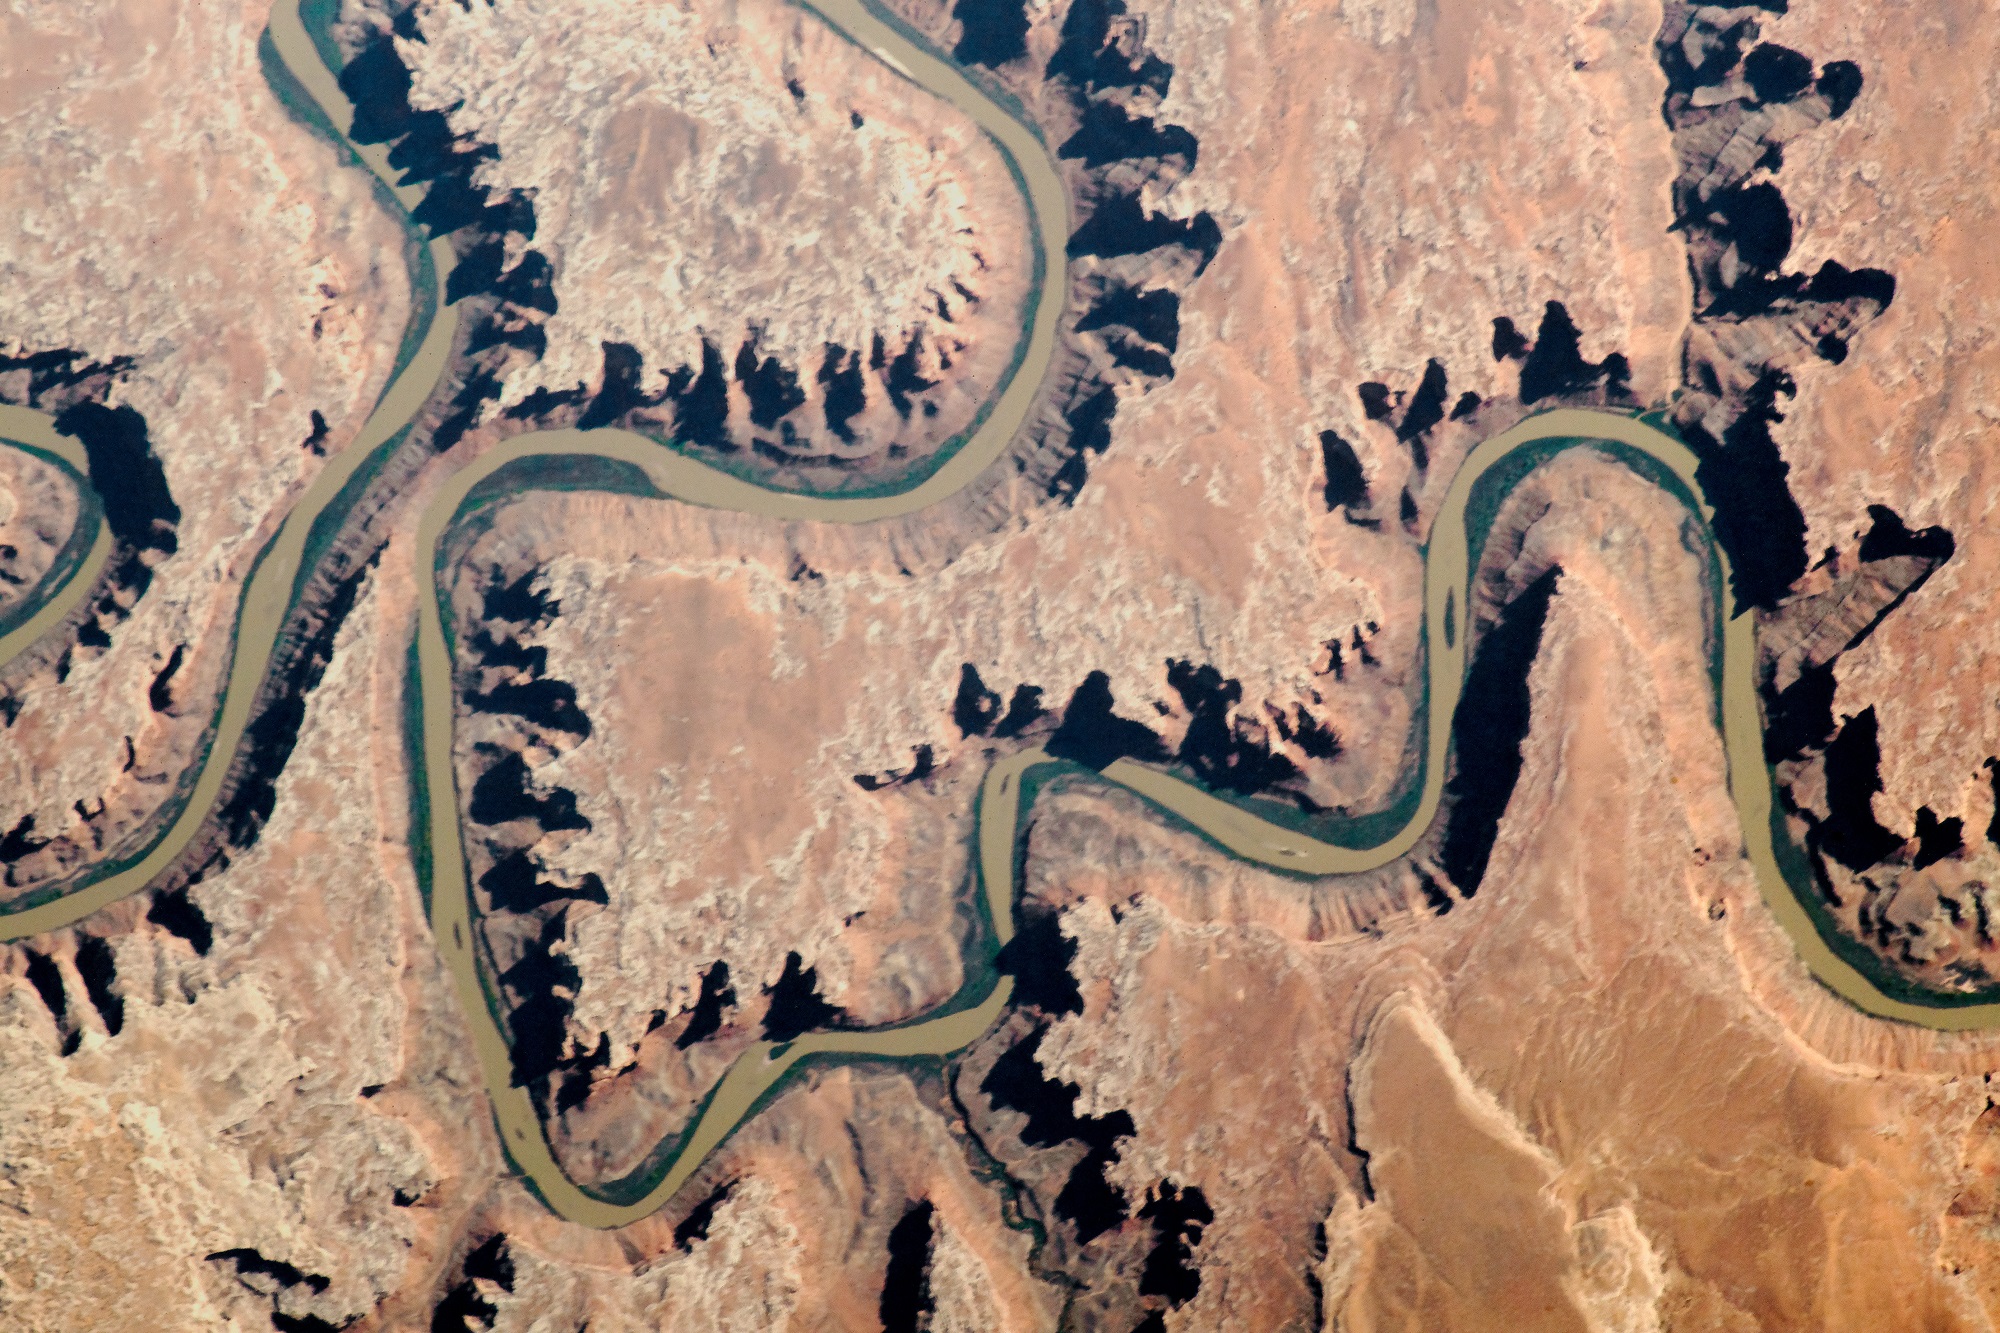 Astronaut captures natural wonders seen from the International Space Station